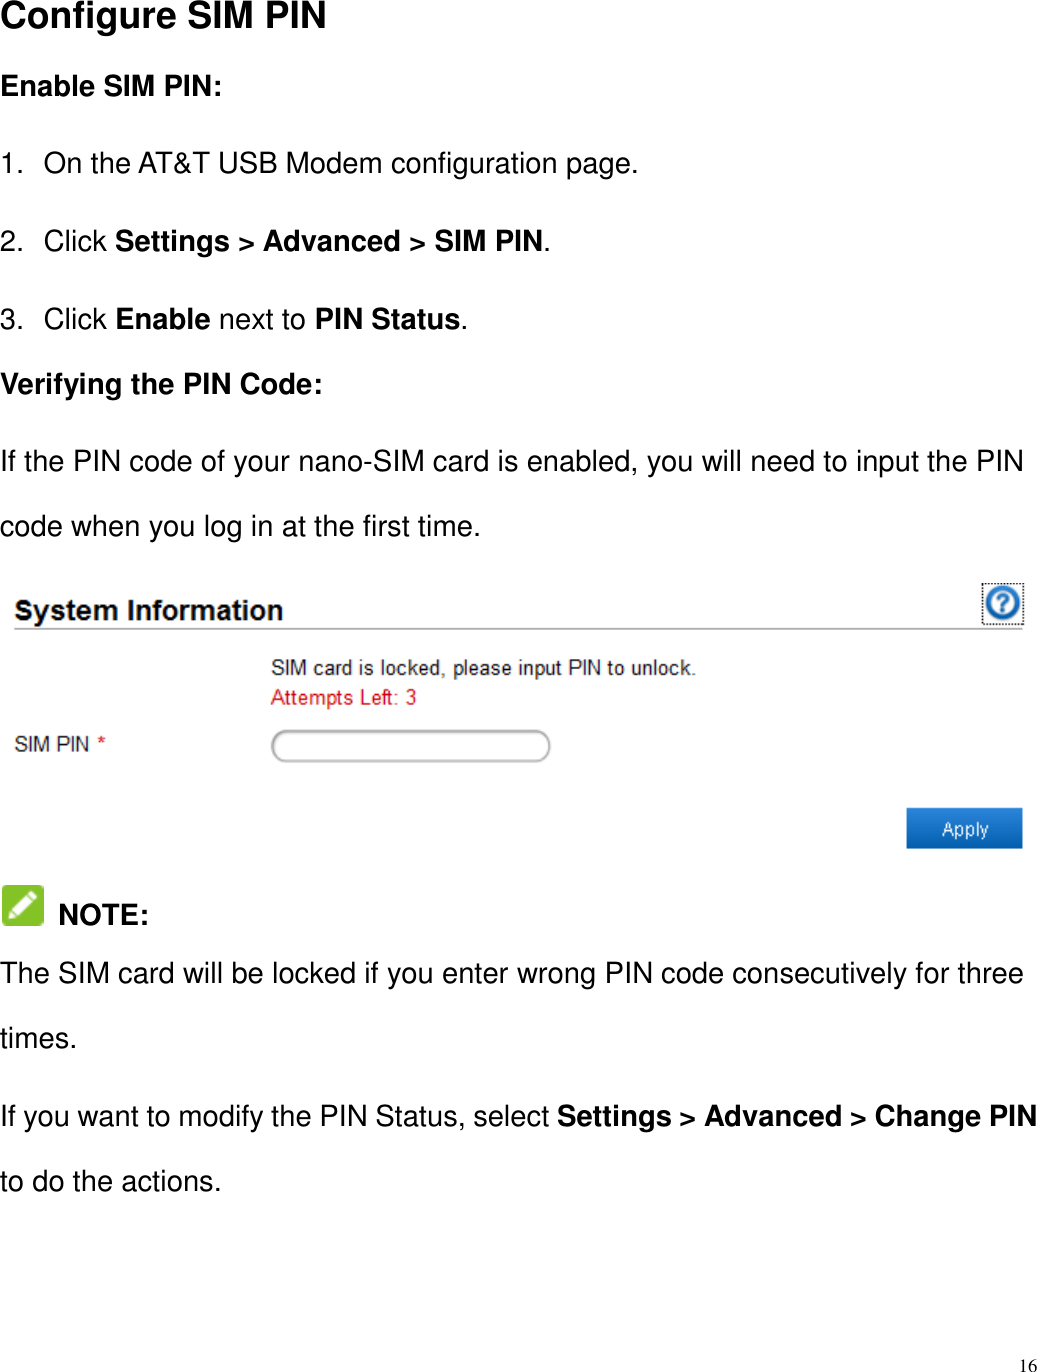 16  Configure SIM PIN Enable SIM PIN: 1.  On the AT&amp;T USB Modem configuration page. 2.  Click Settings &gt; Advanced &gt; SIM PIN. 3.  Click Enable next to PIN Status. Verifying the PIN Code: If the PIN code of your nano-SIM card is enabled, you will need to input the PIN code when you log in at the first time.   NOTE:   The SIM card will be locked if you enter wrong PIN code consecutively for three times. If you want to modify the PIN Status, select Settings &gt; Advanced &gt; Change PIN to do the actions. 